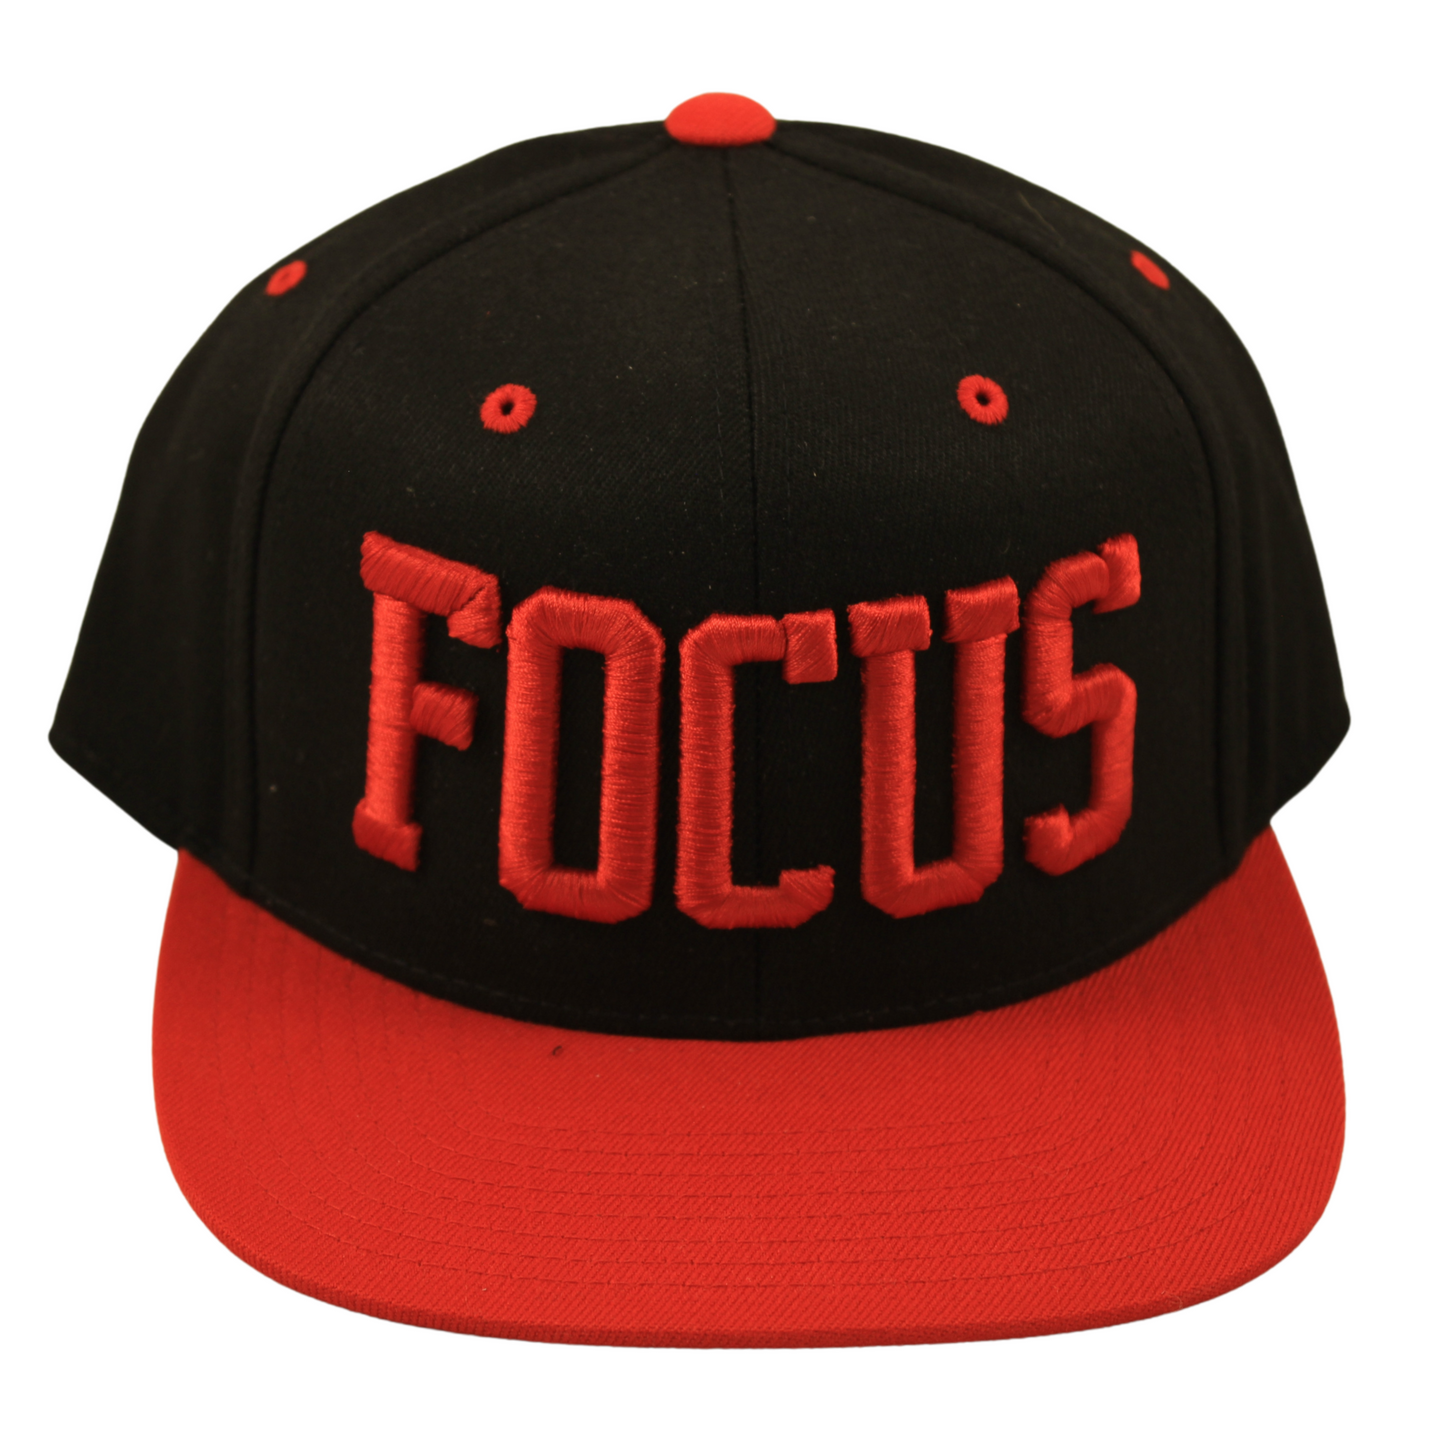 FOCUS 110 Snapback Black/Red Embroidery